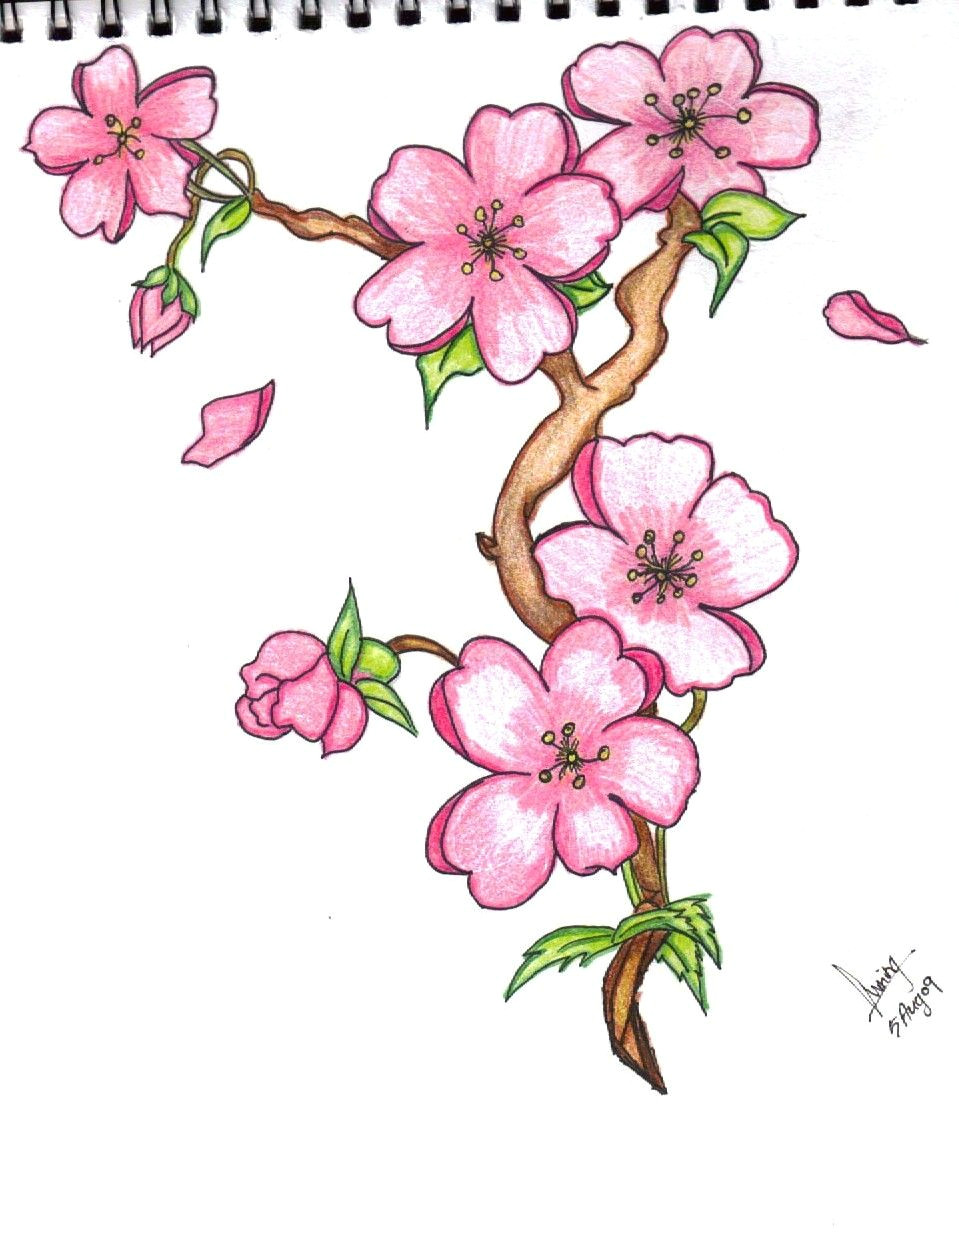 Drawing Of Hanging Flowers Pin by Marvin todd On Drawing Flowers In 2019 Pinterest Drawings